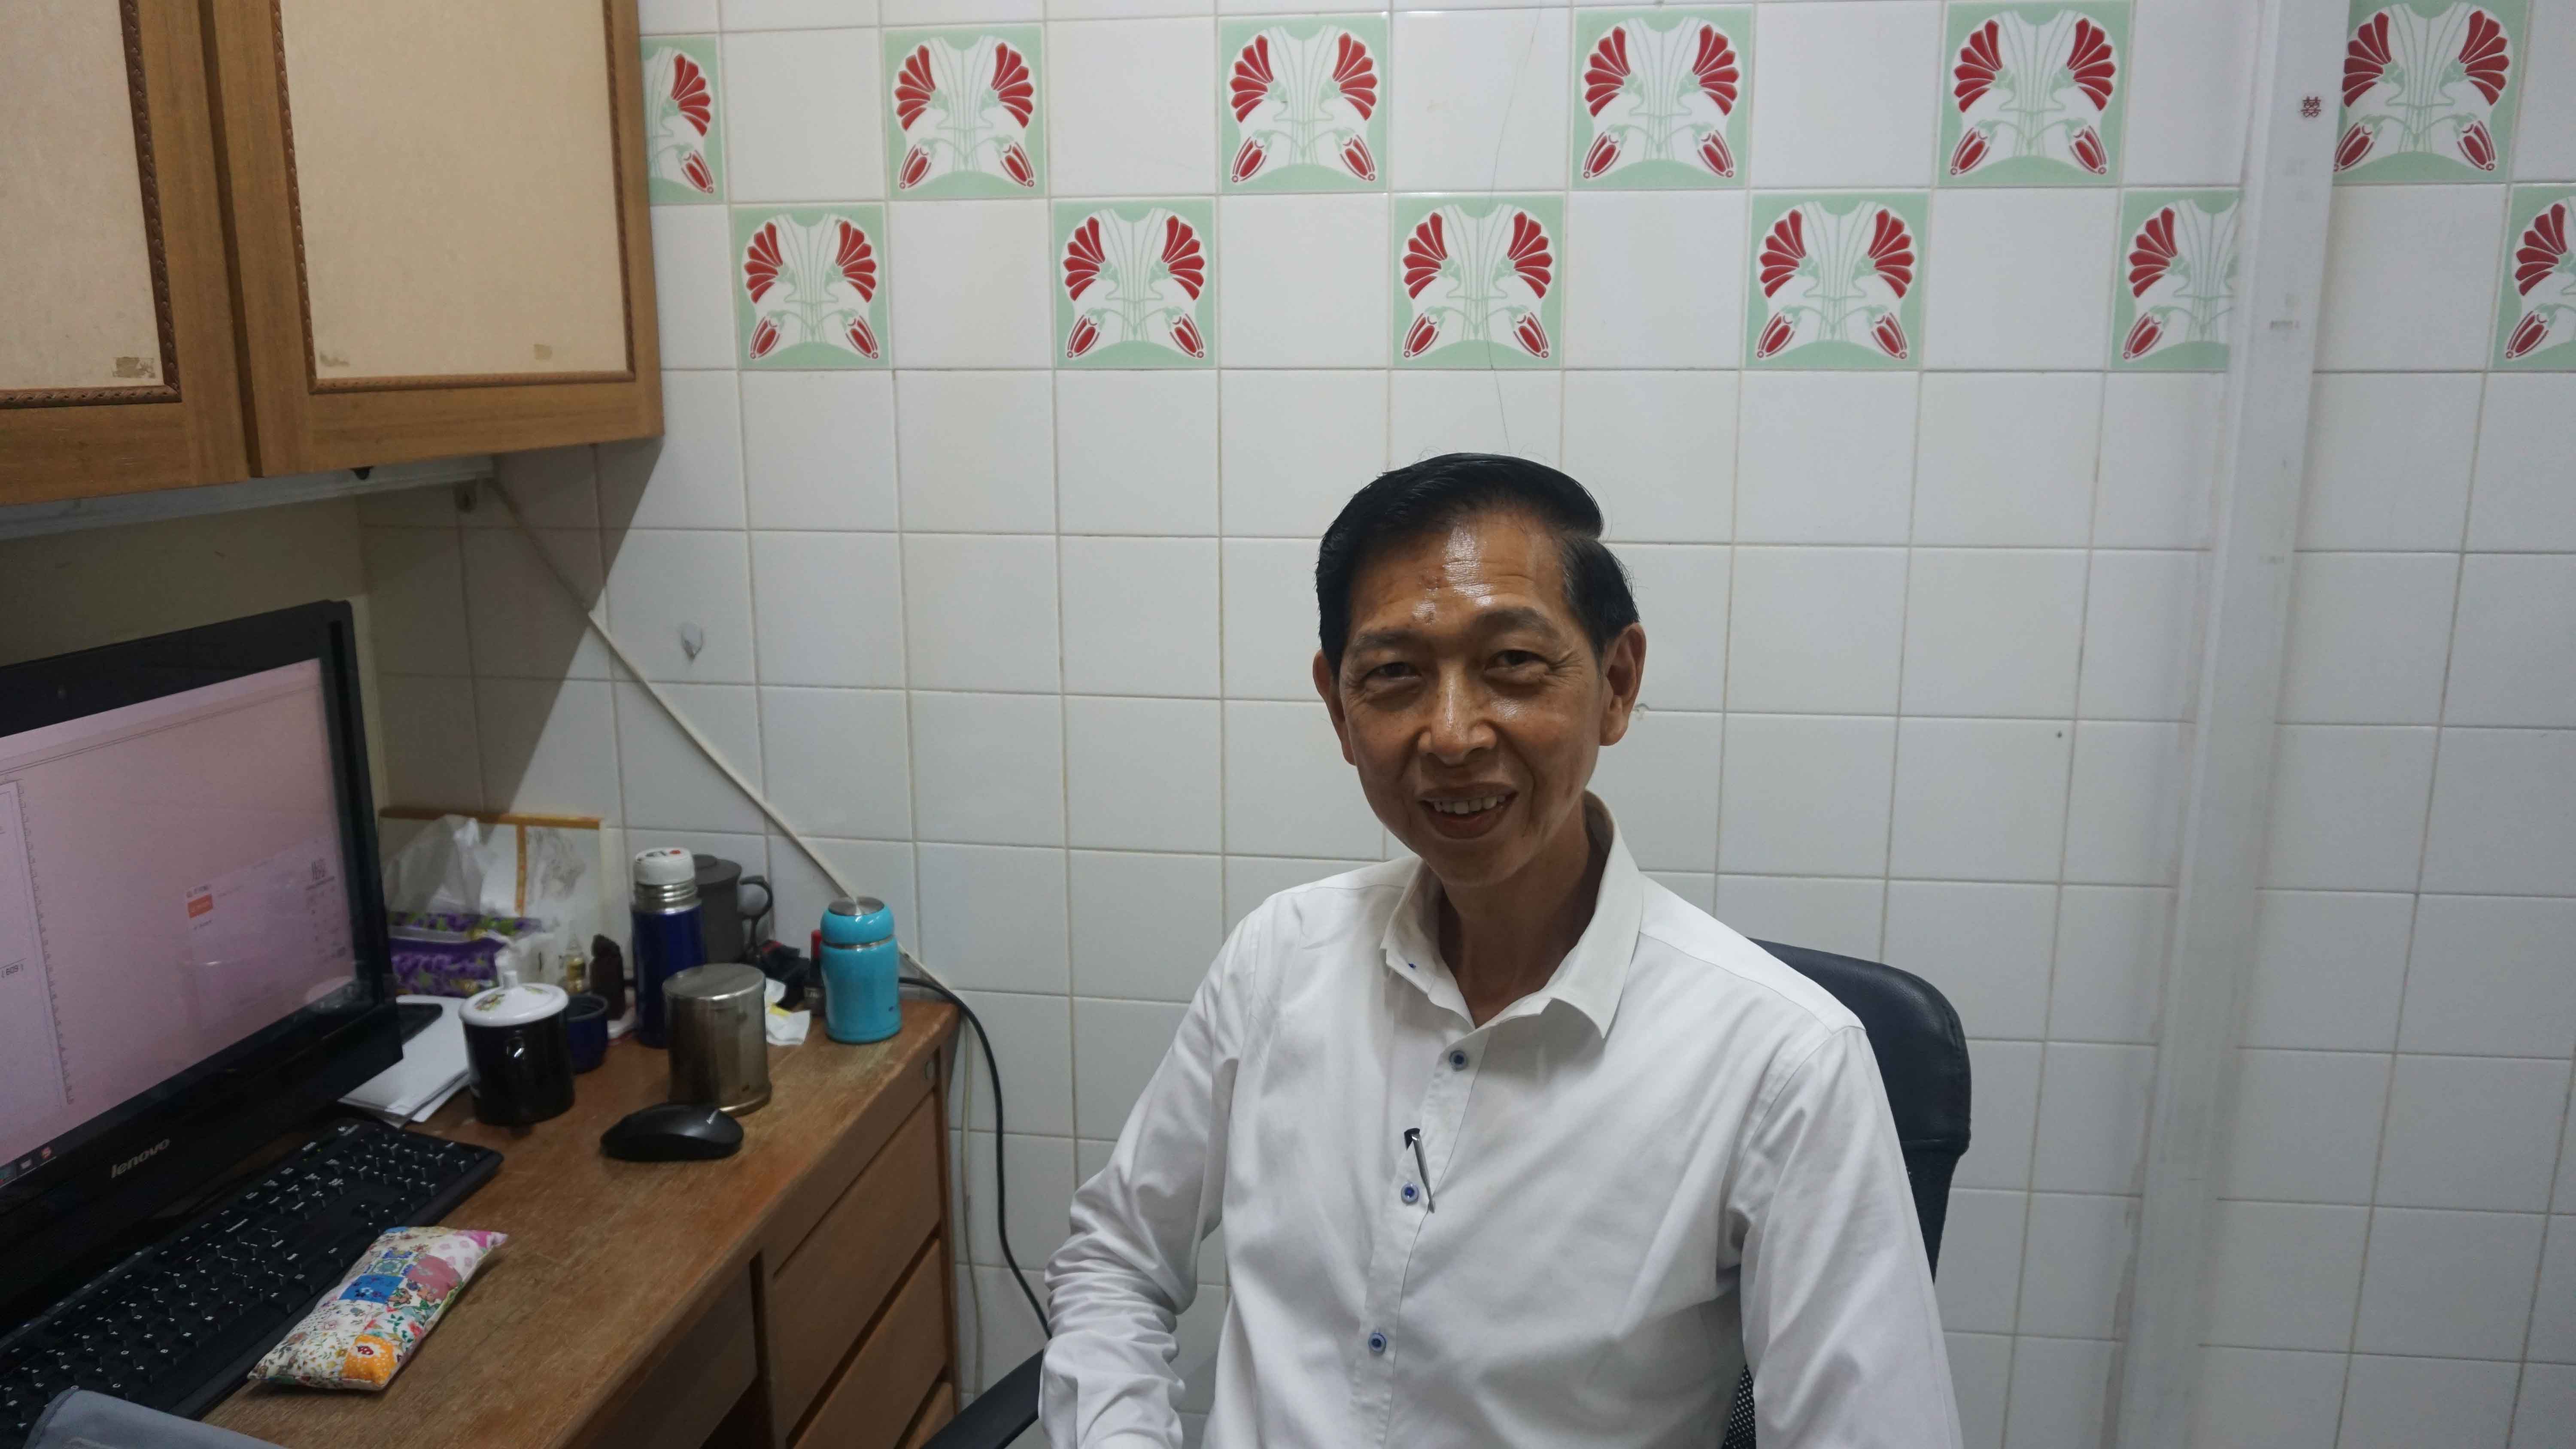 Mr Chow Khai Shui is the managing director of Teck Soon Medical Hall and a TCM doctor. He emphasises the need to preserve TCM because it is medical knowledge accumulated over thousands of years, and also a cornerstone of traditional Chinese culture.  